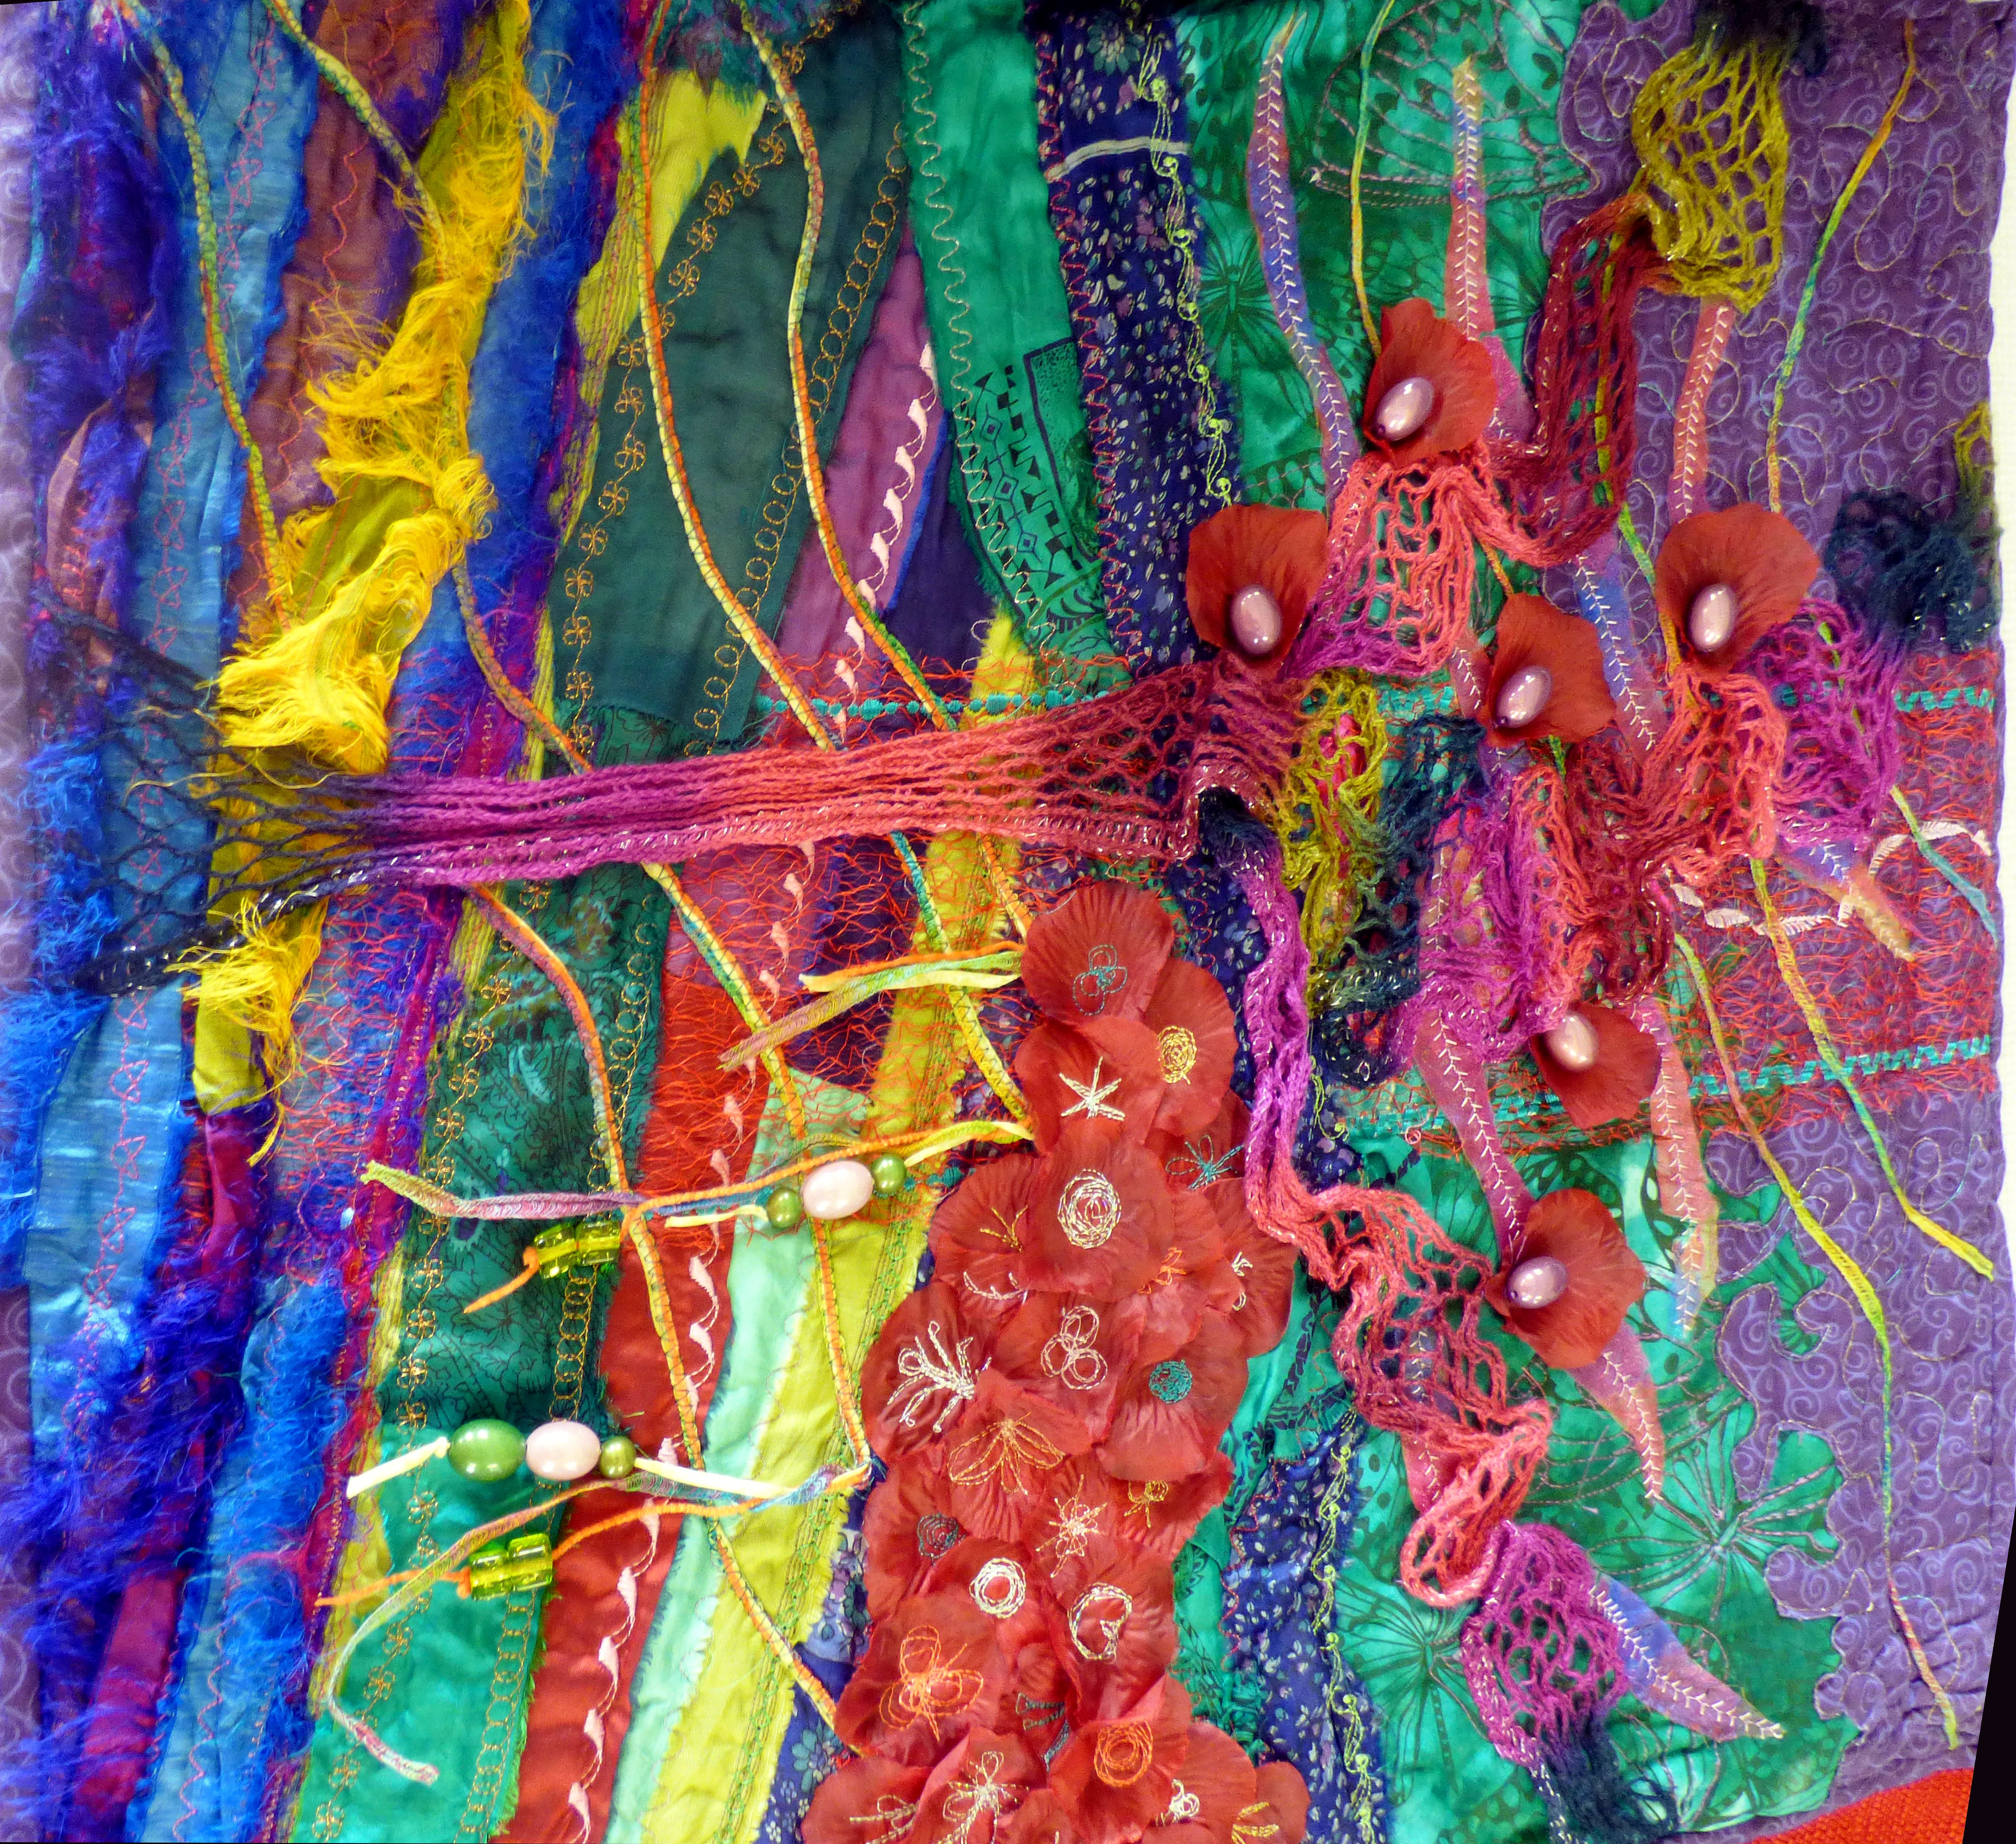 (detail) FANTASY TREE by Diane Moore at "Creating with Sari Silk" workshop with Diane Moore, Feb 2023